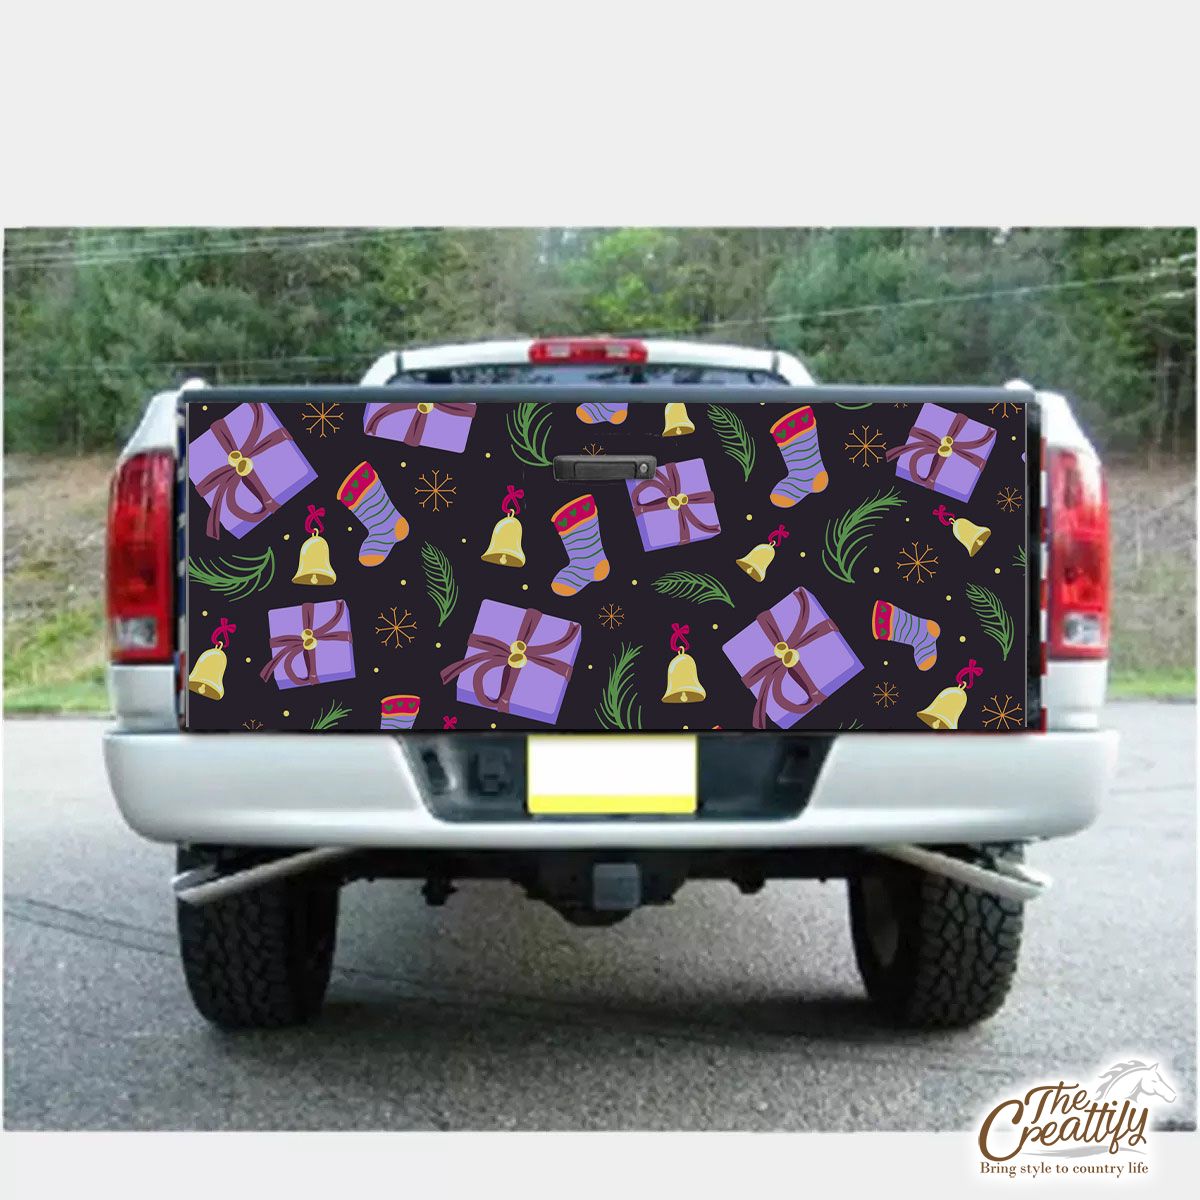 Purple Christmas Gifts And Socks With Bells On The Snowflake Dark Background Truck Bed Decal